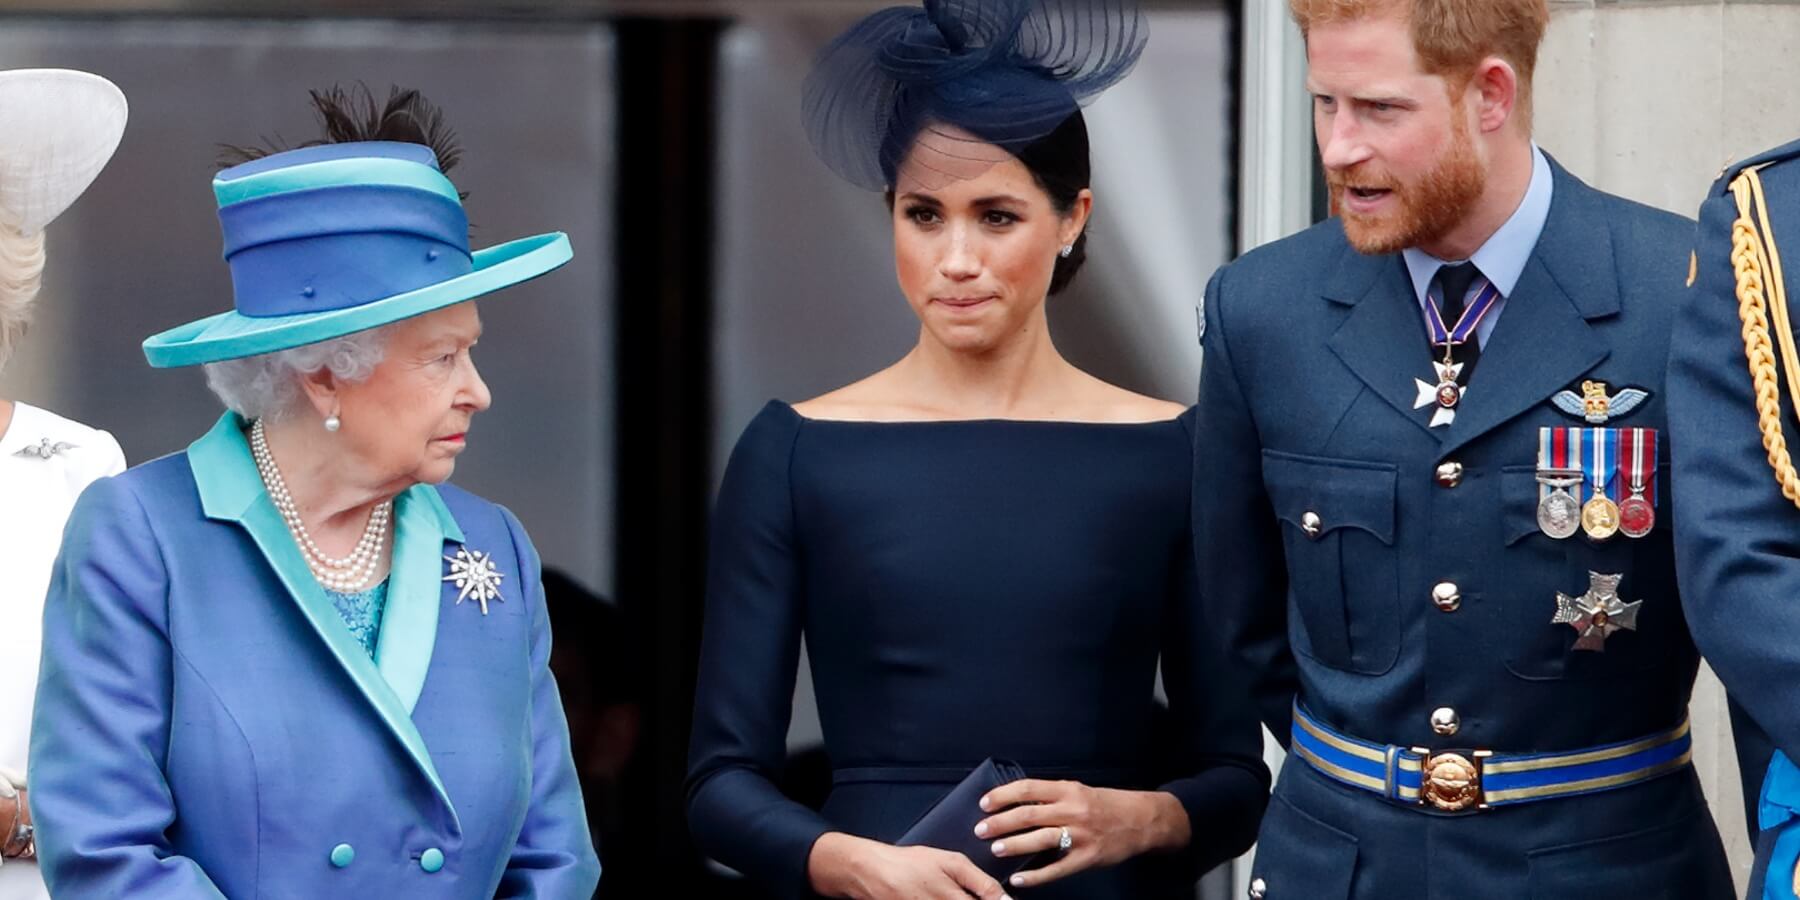 Queen Elizabeth was reportedly quite unhappy with Meghan Markle and Prince Harry's decision to call their only daughter Lilibet.